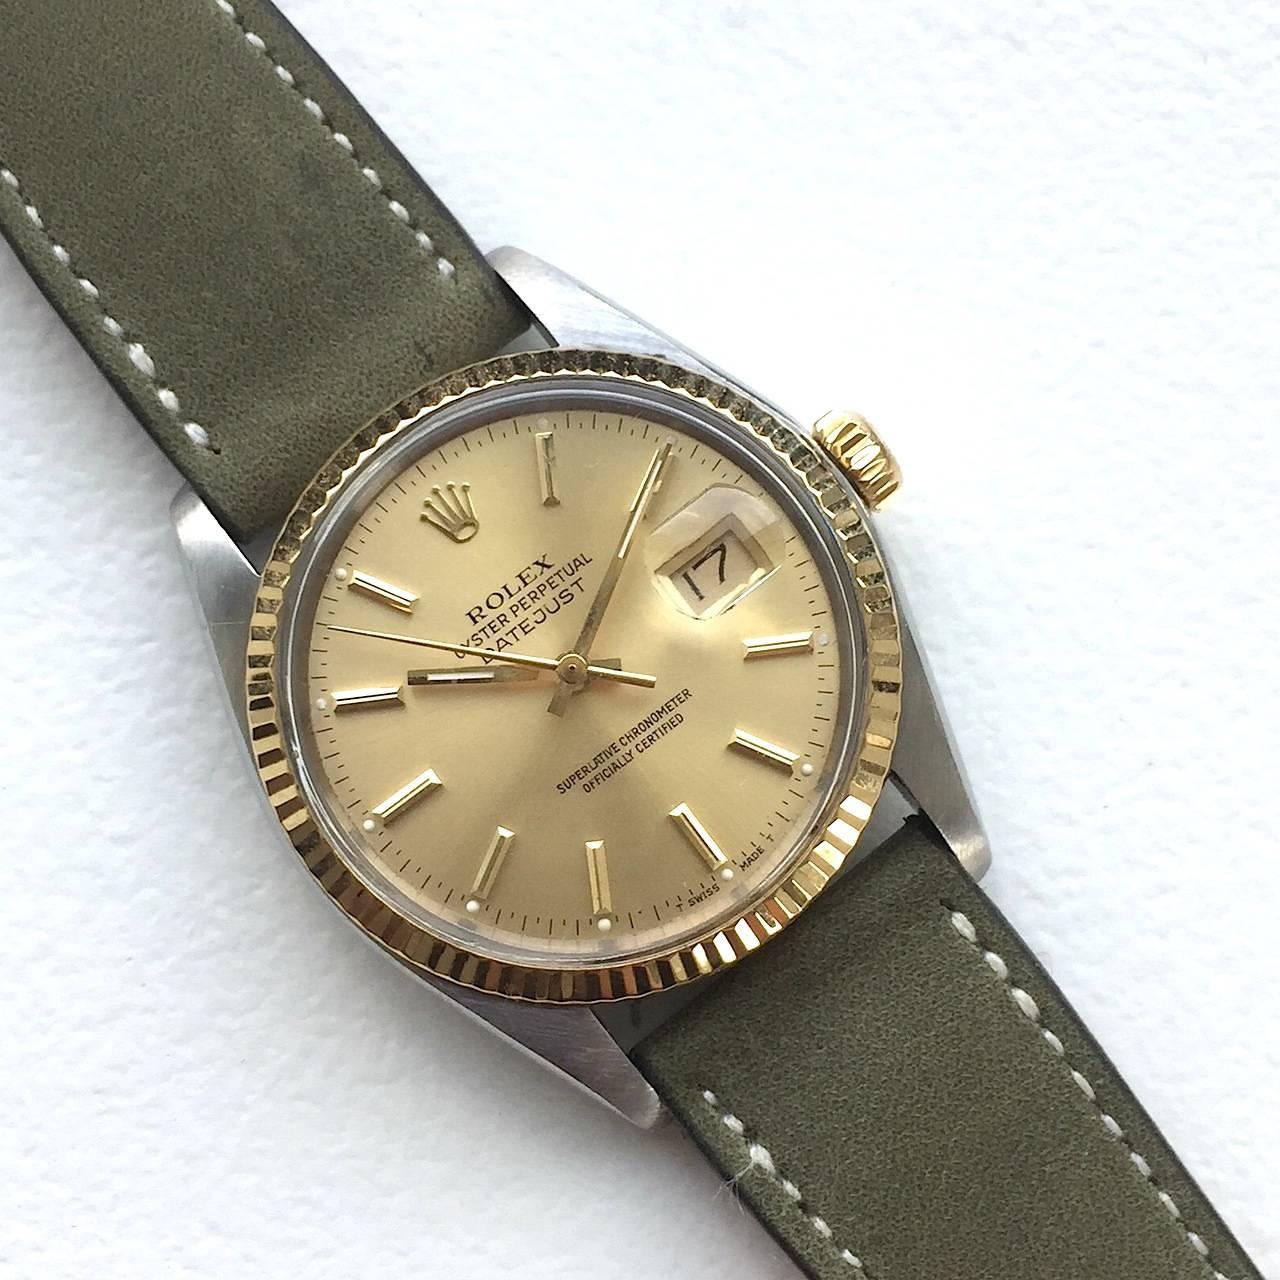 Rolex Stainless Steel and Yellow Gold Oyster Perpetual Datejust Watch
Beautiful Factory Champagne Dial with Yellow Applied Hour Markers
Yellow Gold Gold Fluted Bezel
Stainless Steel Case
36mm in size 
Features Rolex Automatic Movement Calibre 3035